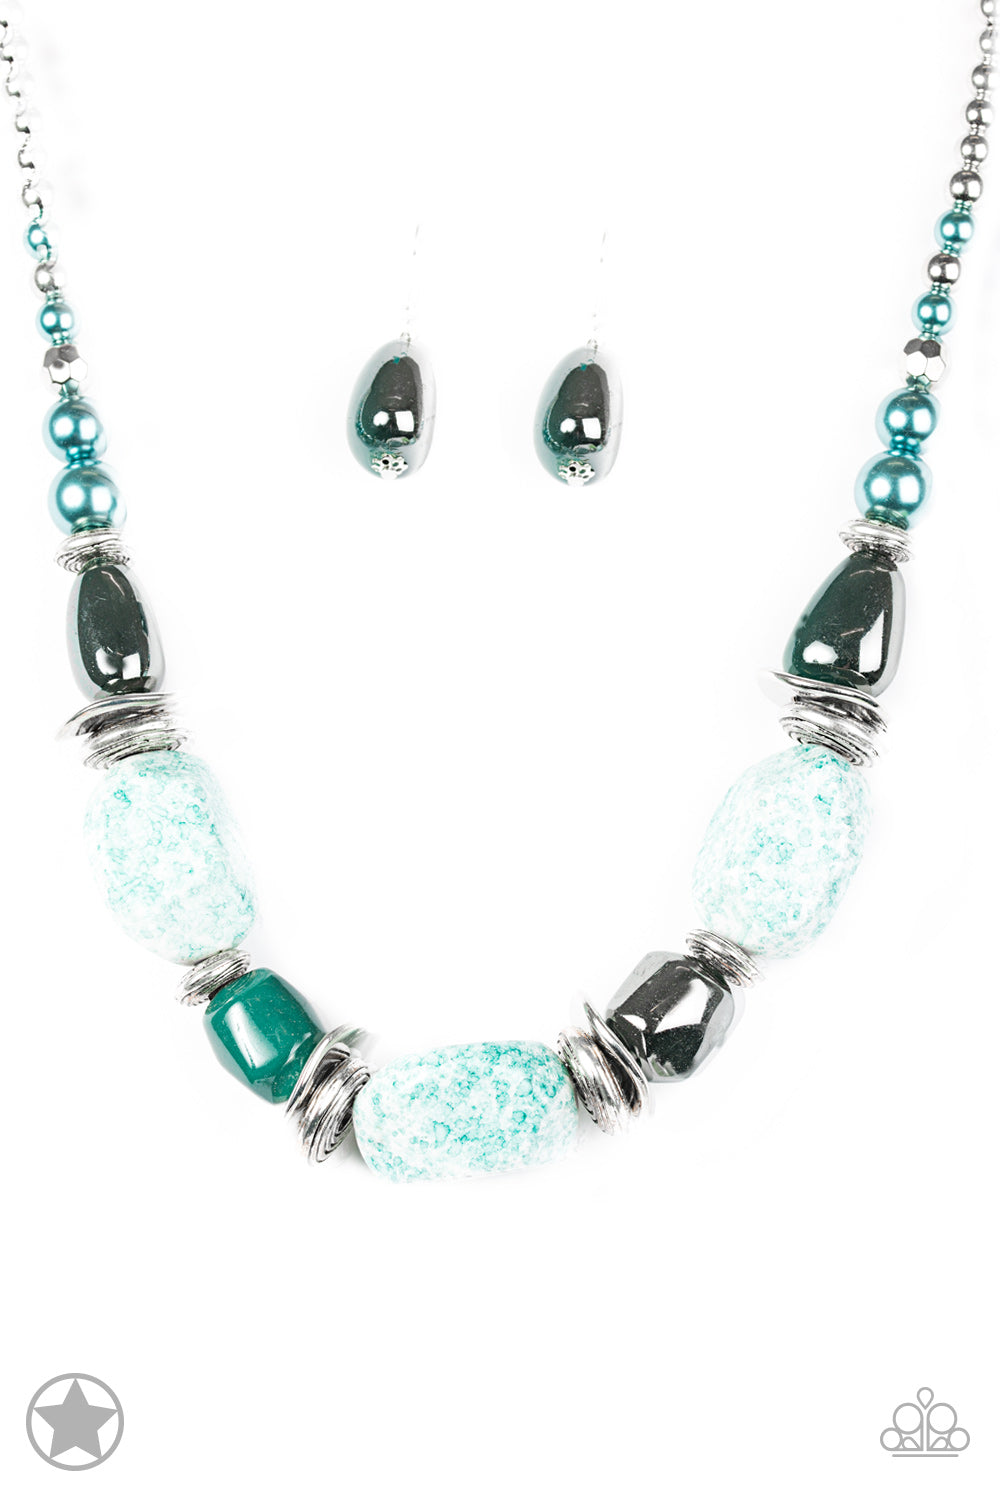 Paparazzi Accessories In Good Glazes - Blue Blockbuster Necklaces - Lady T Accessories